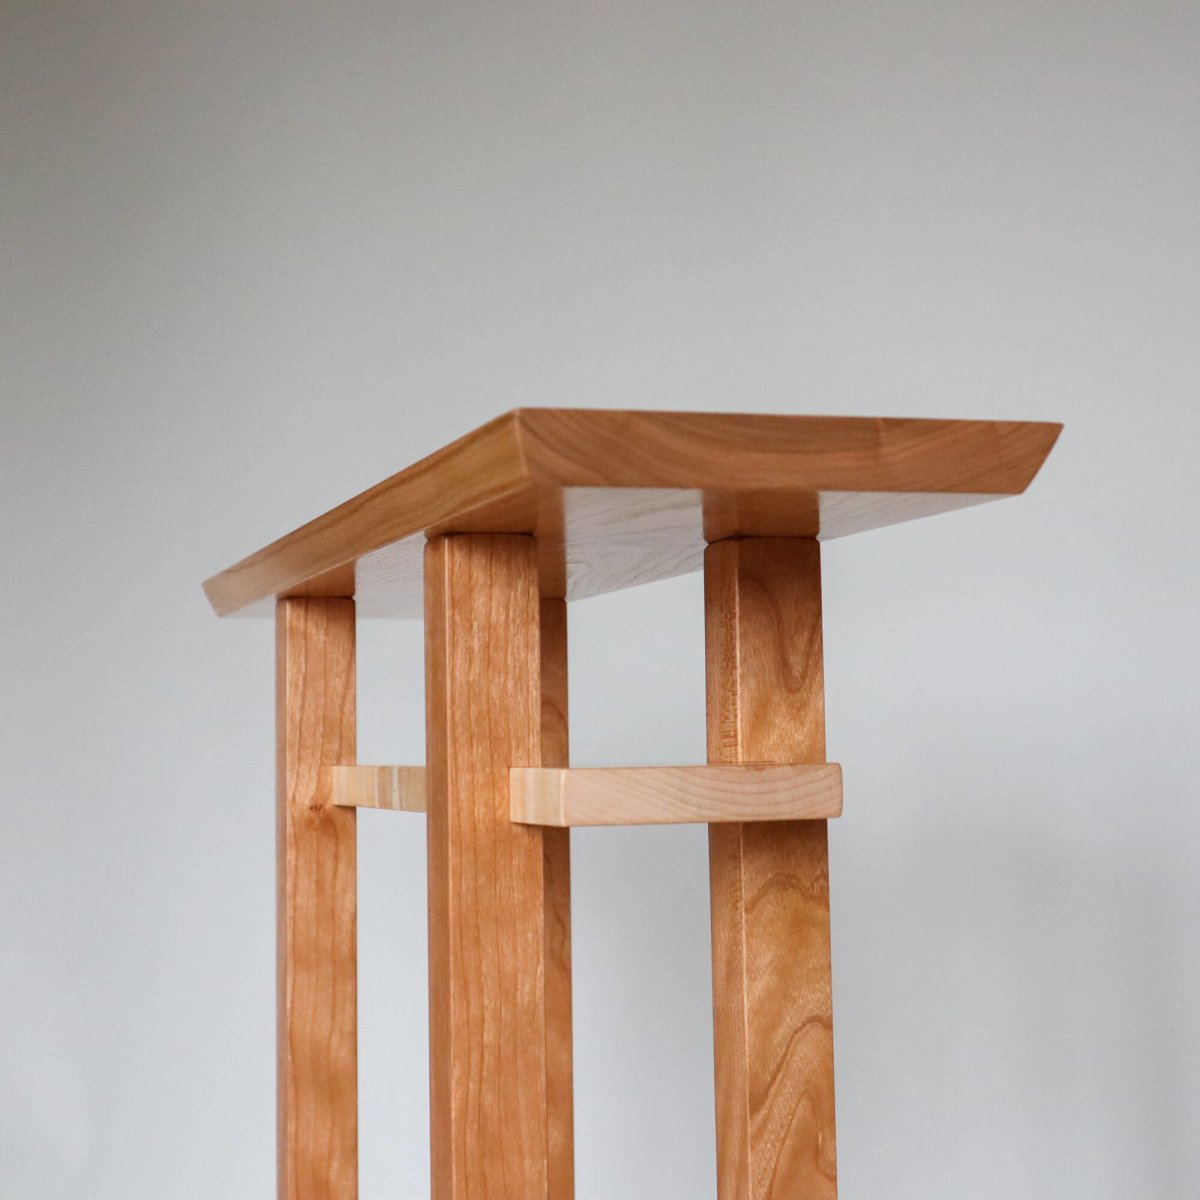 cherry side table thin for hallways or small entry table. cherry table with shelf in tiger maple by Mokuzai Furniture